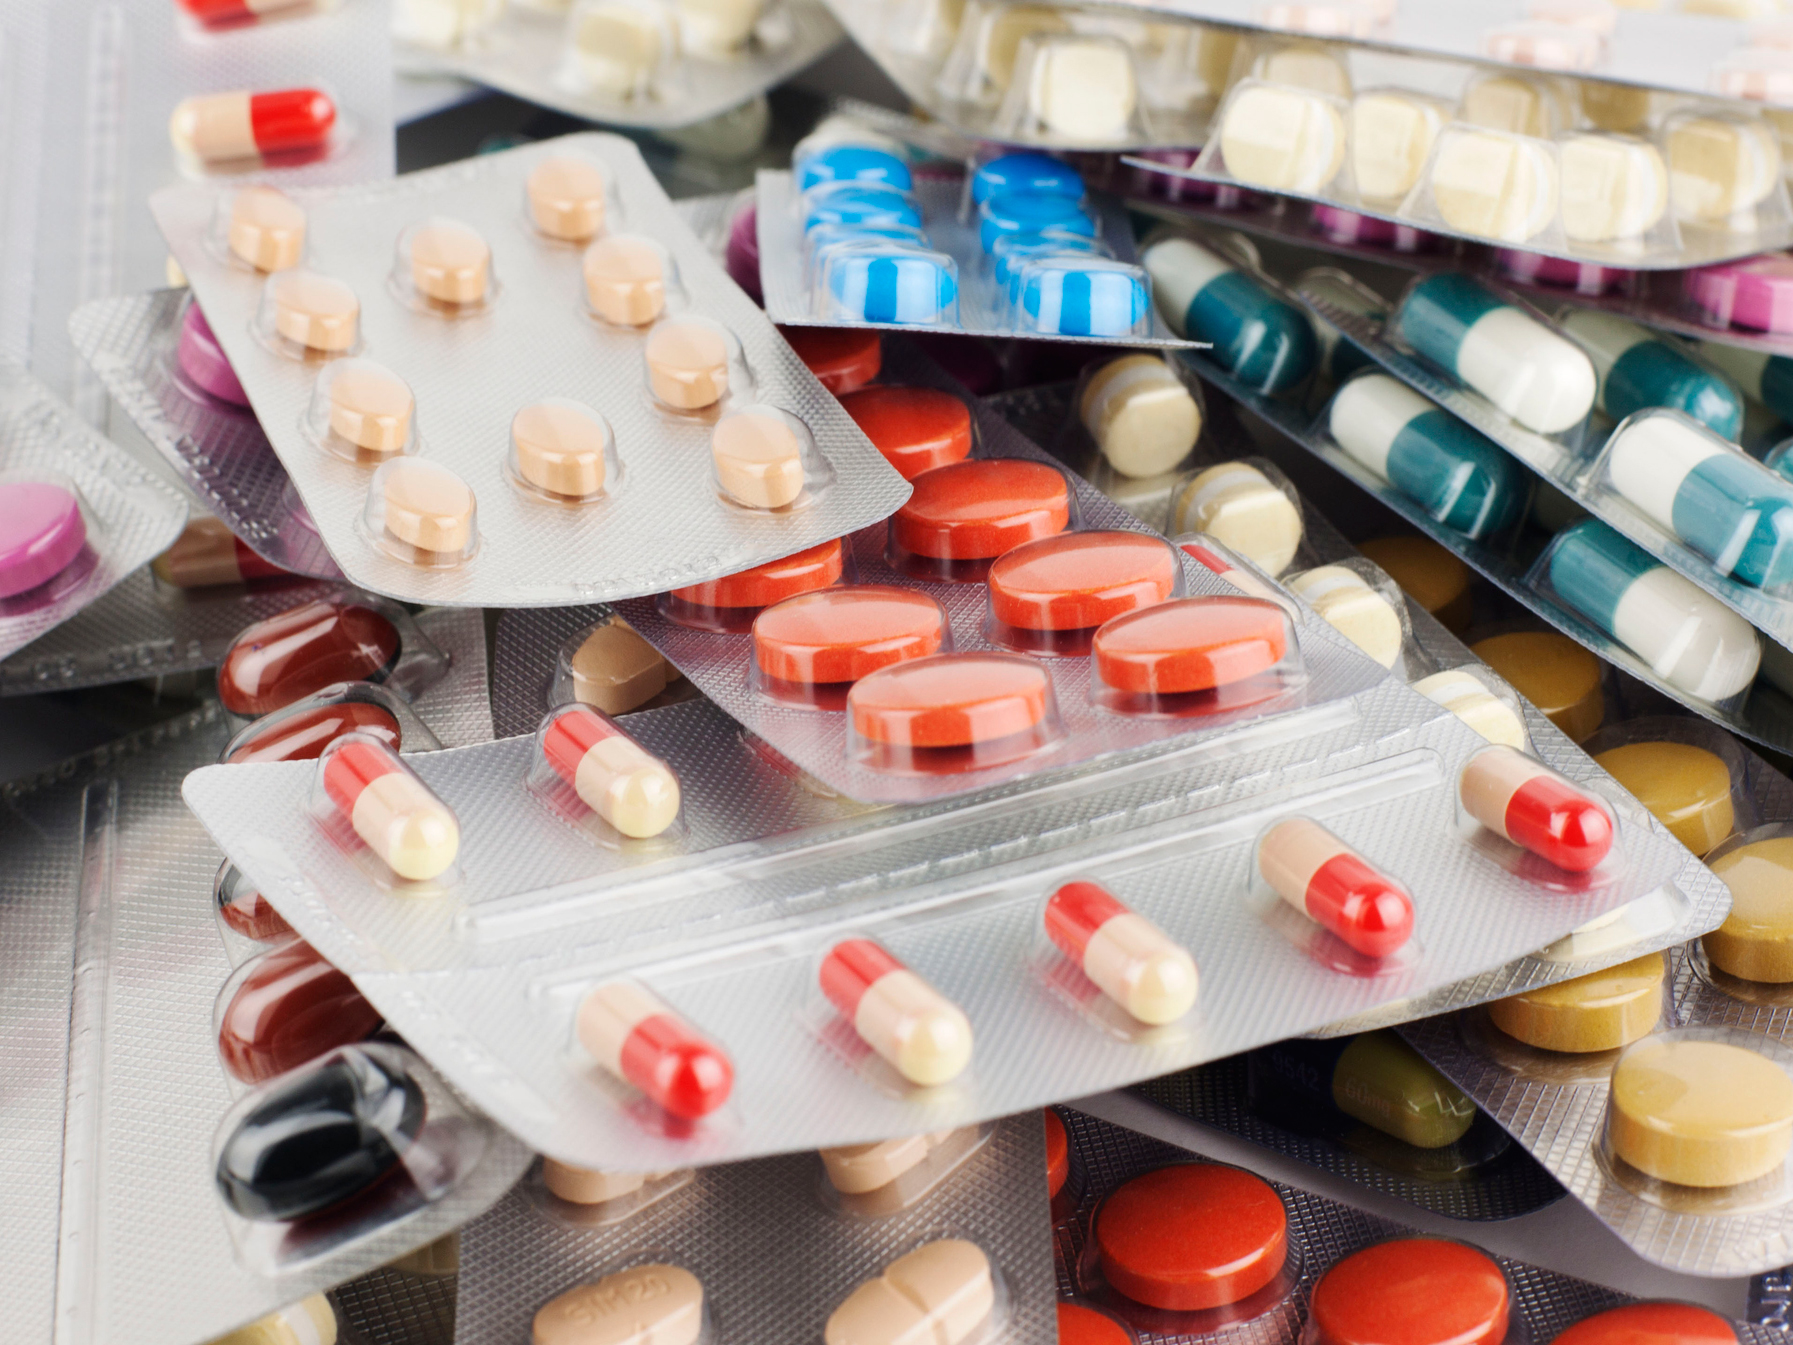 20+ medications that affect your thyroid